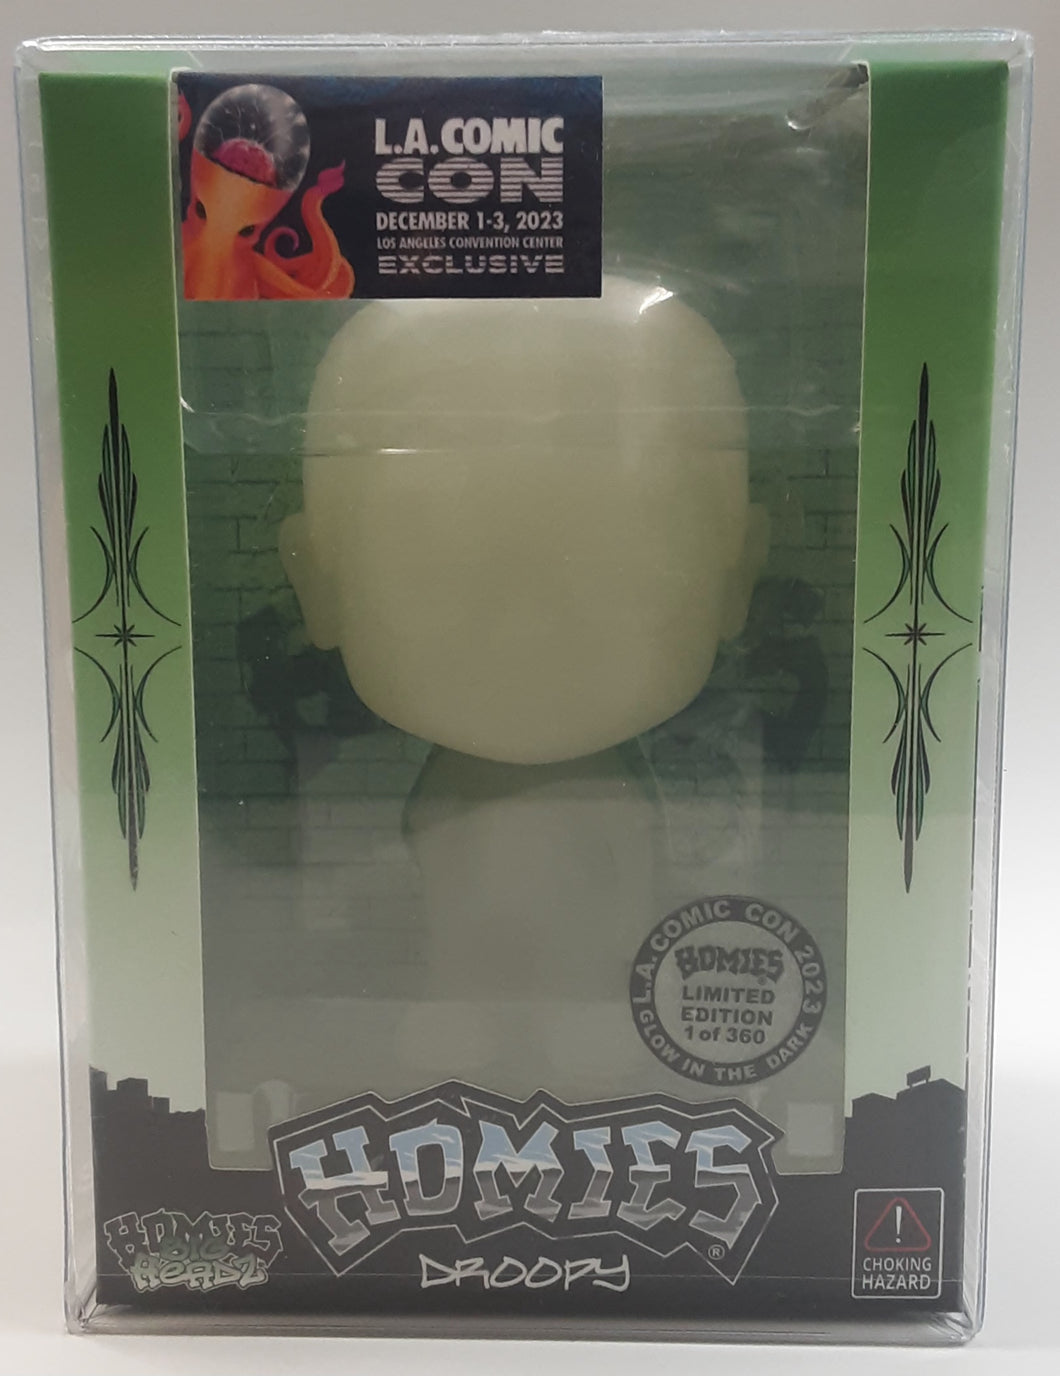 Homies Big Headz Night Glow released at the 2023 LA Comic Con Limited To 360 . DROOPY